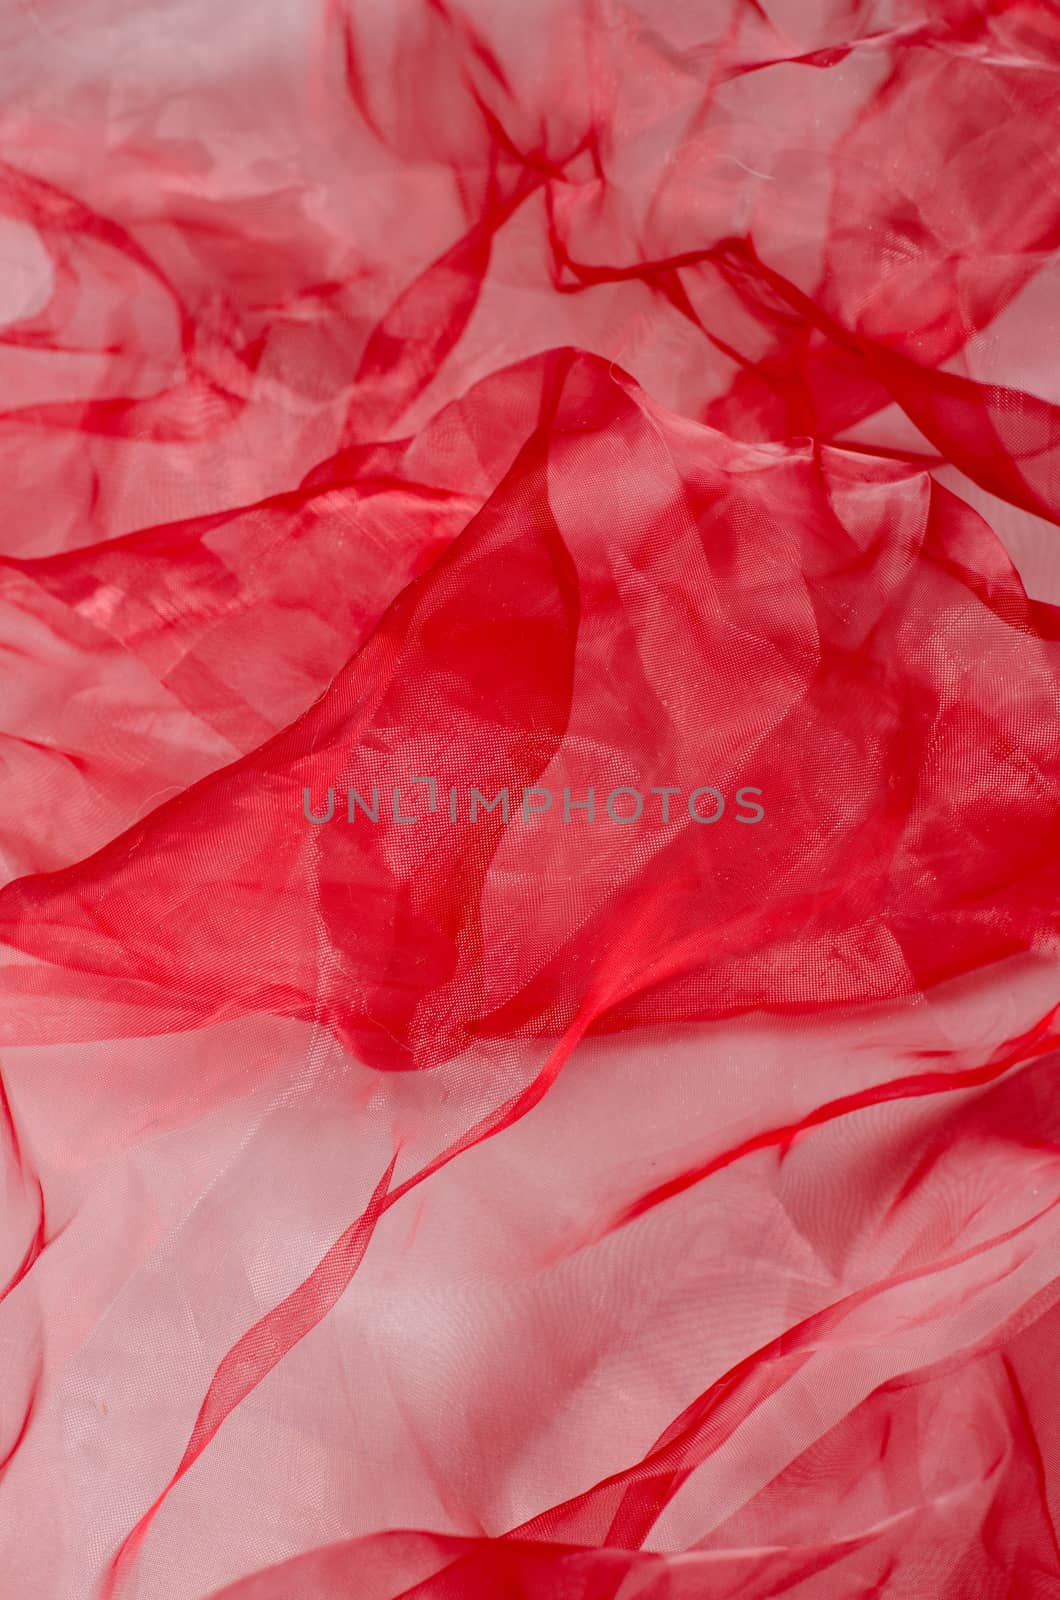 red organza by sarkao